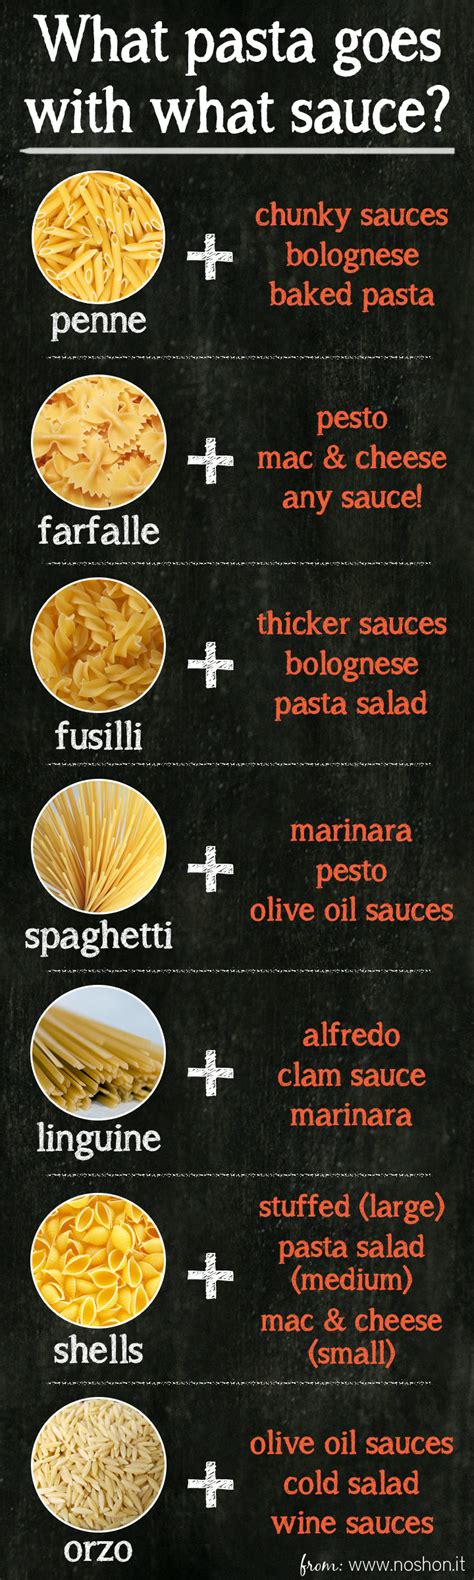 Italian Pasta And Sauces Guide Infographic Ecogreenlove